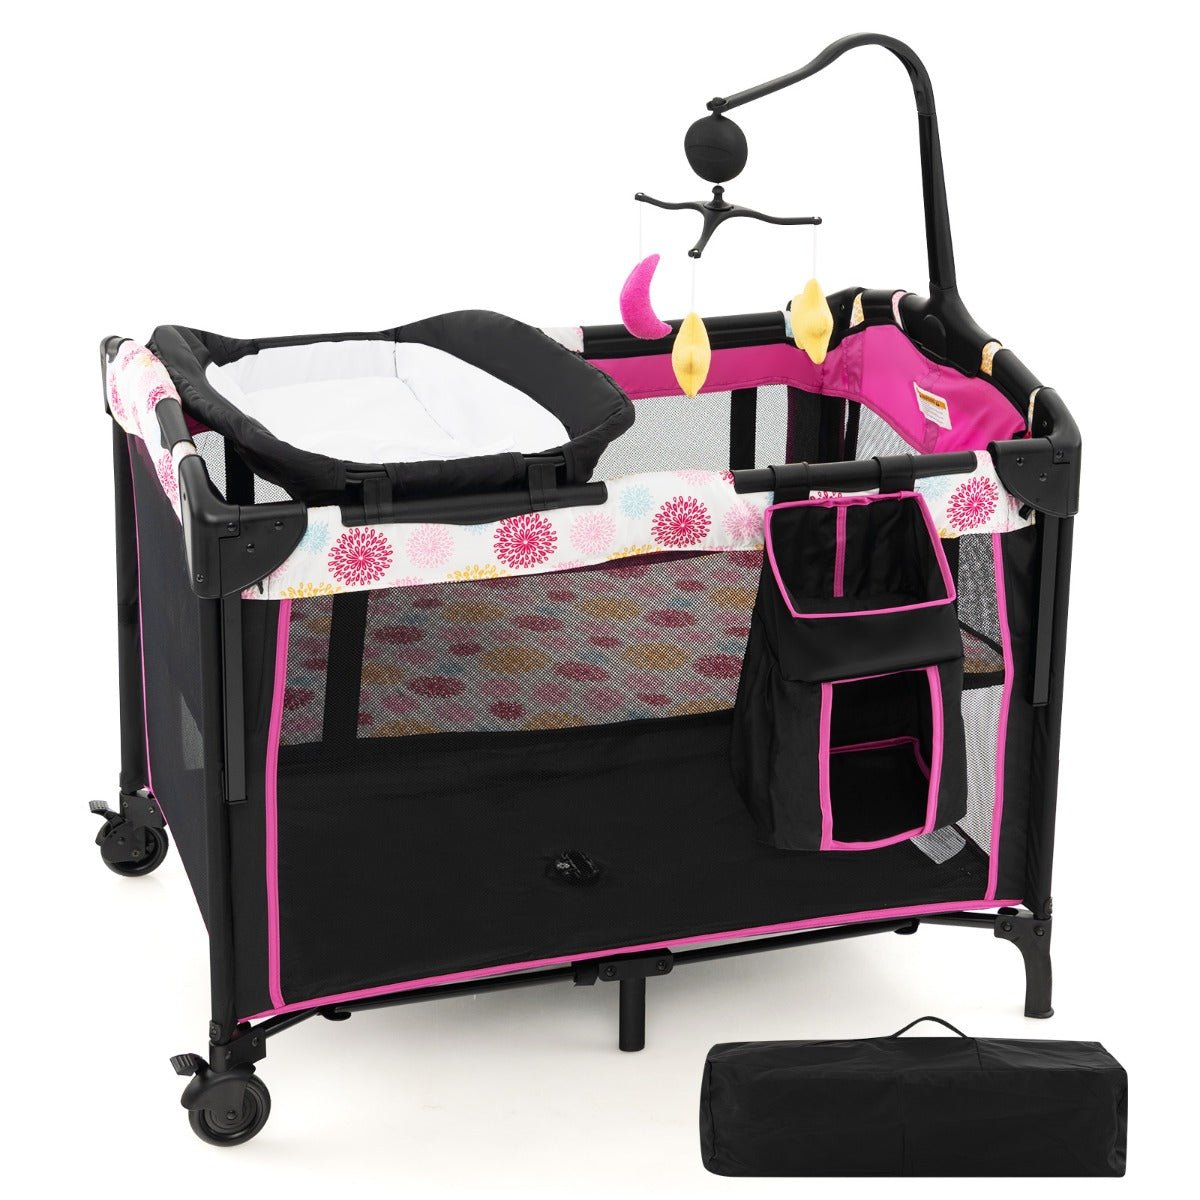 4-in-1 Convertible Baby Nursery Center with Changing Table Pink